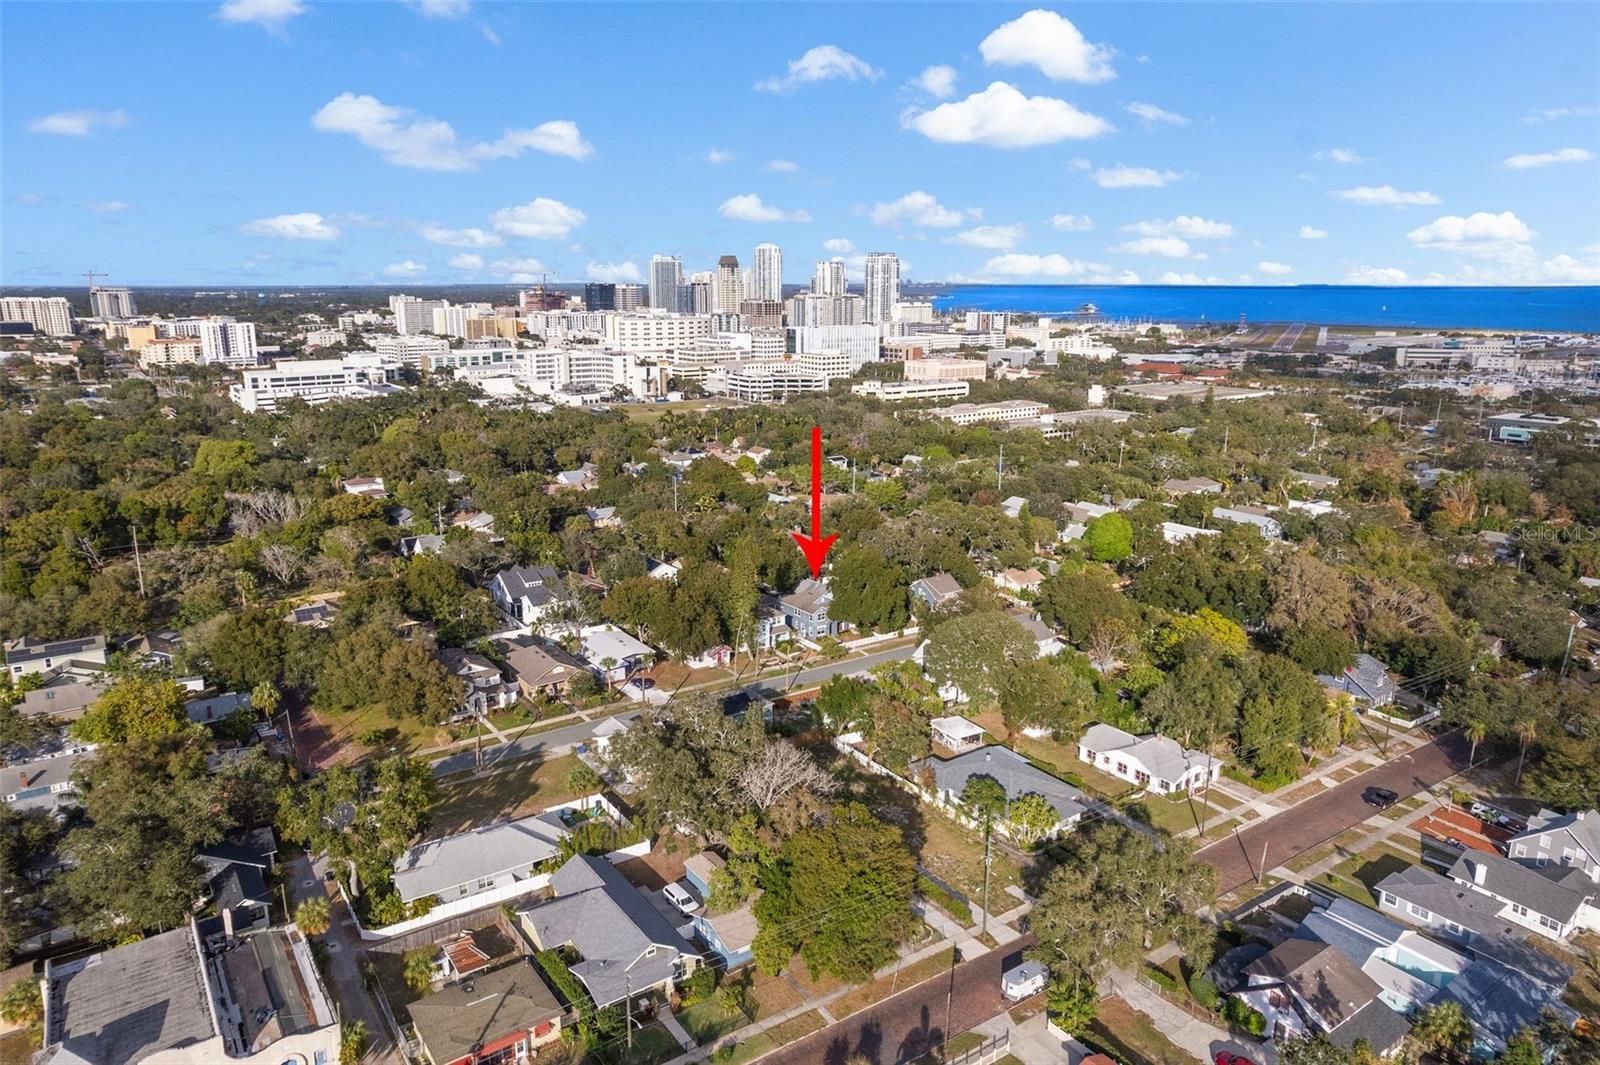 This home is very close to downtown St Petersburg and surrounding historic neighborhoods like Old Northeast and Old Southeast.